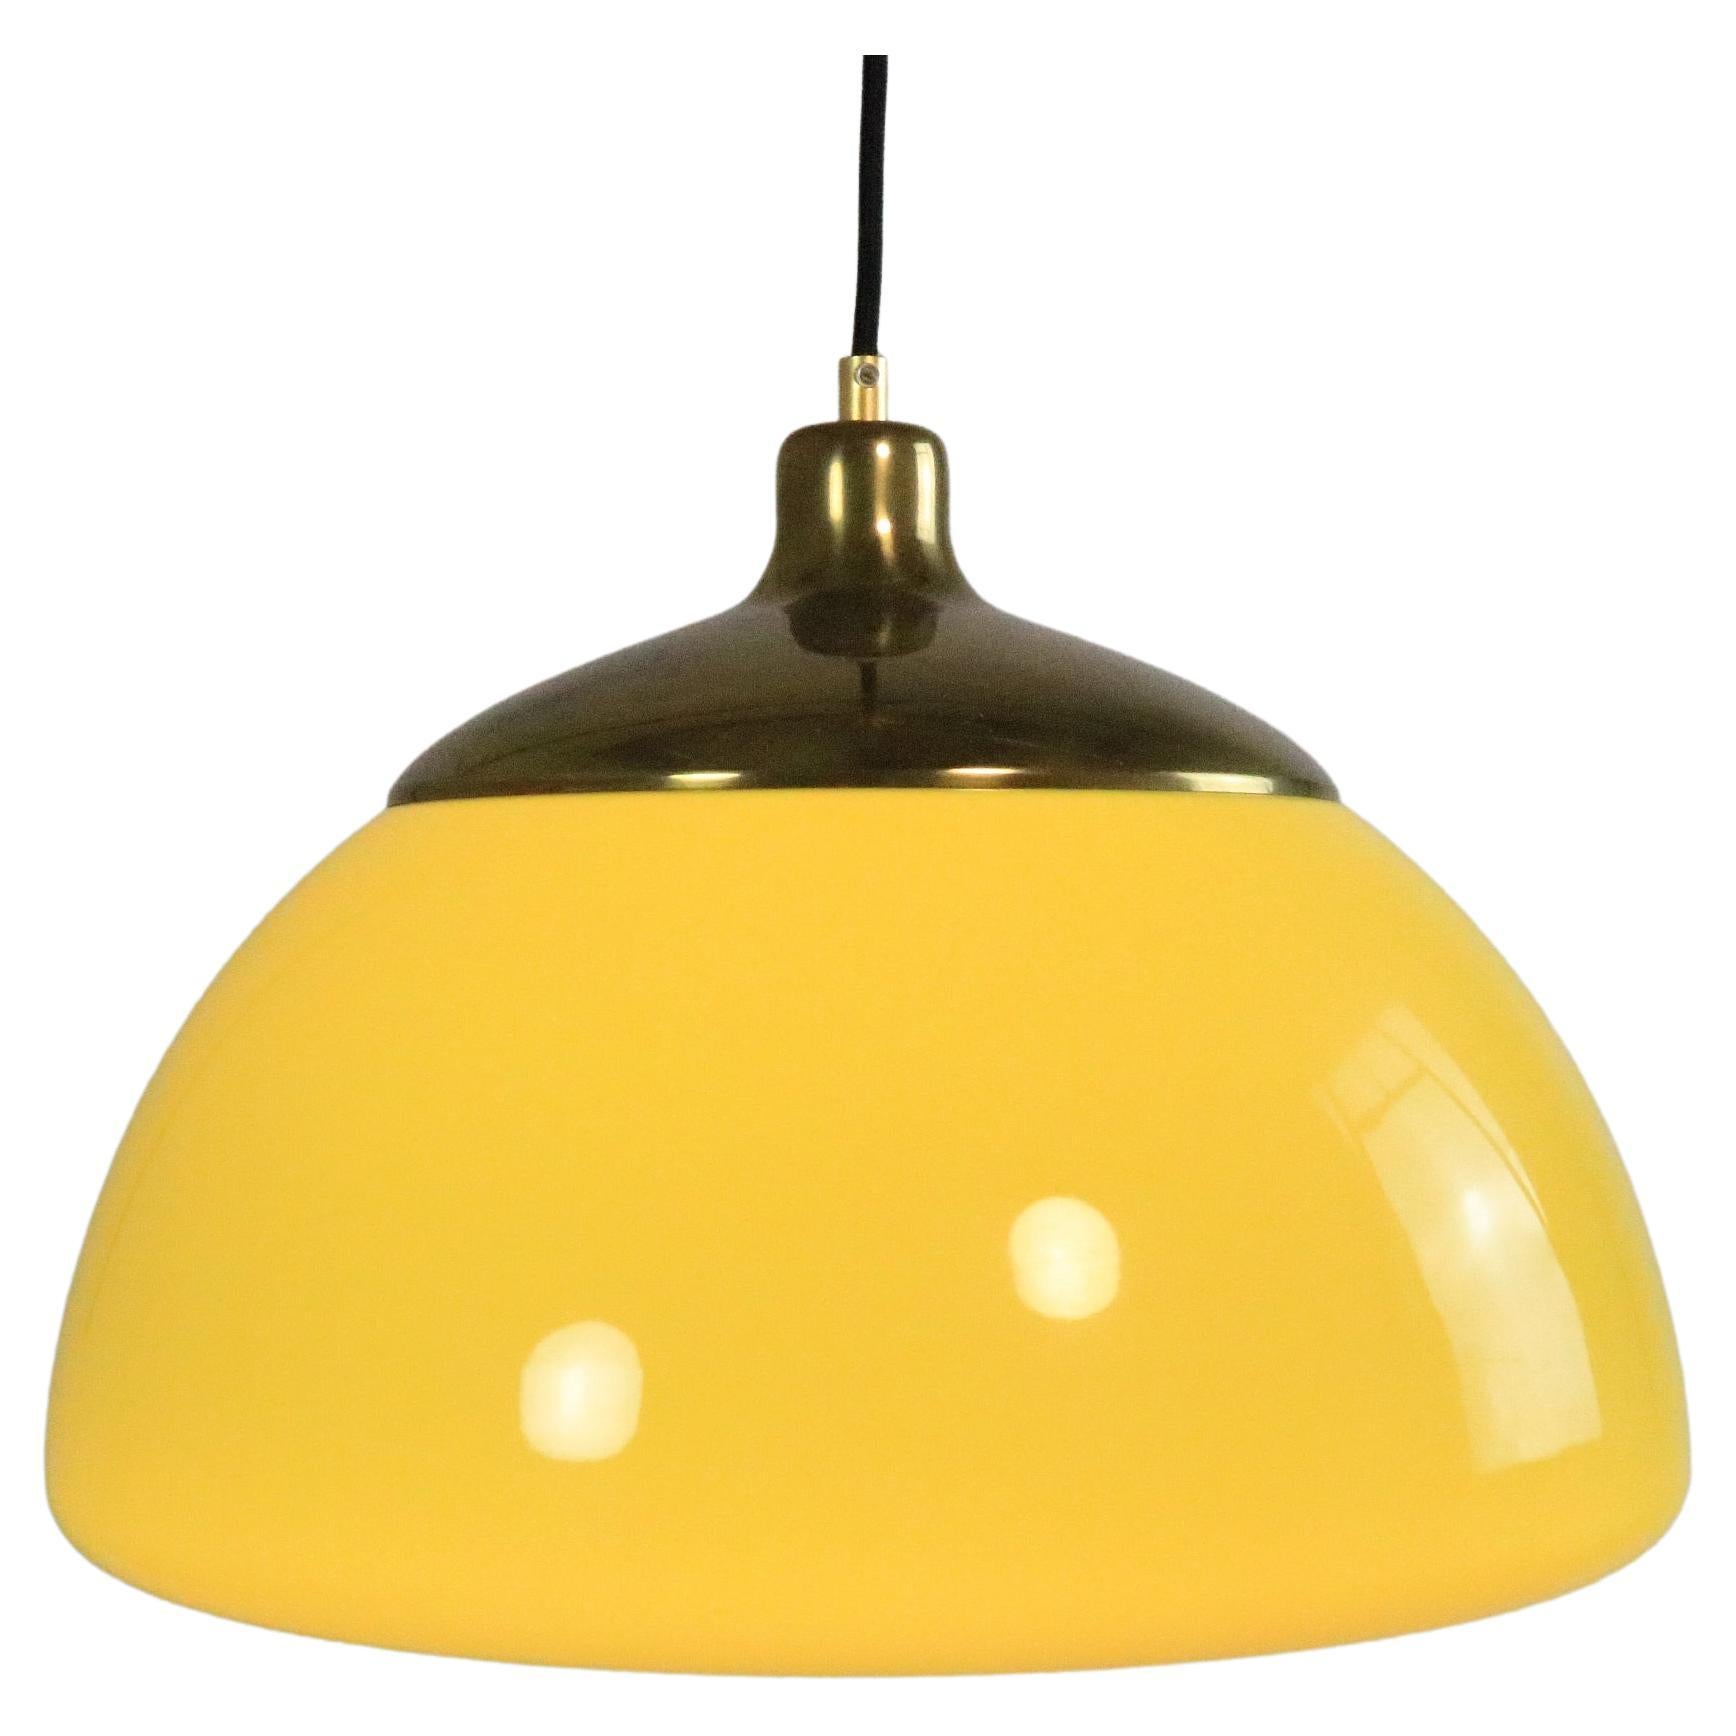 Original 1970s Pendant Light from COSACK, Germany For Sale